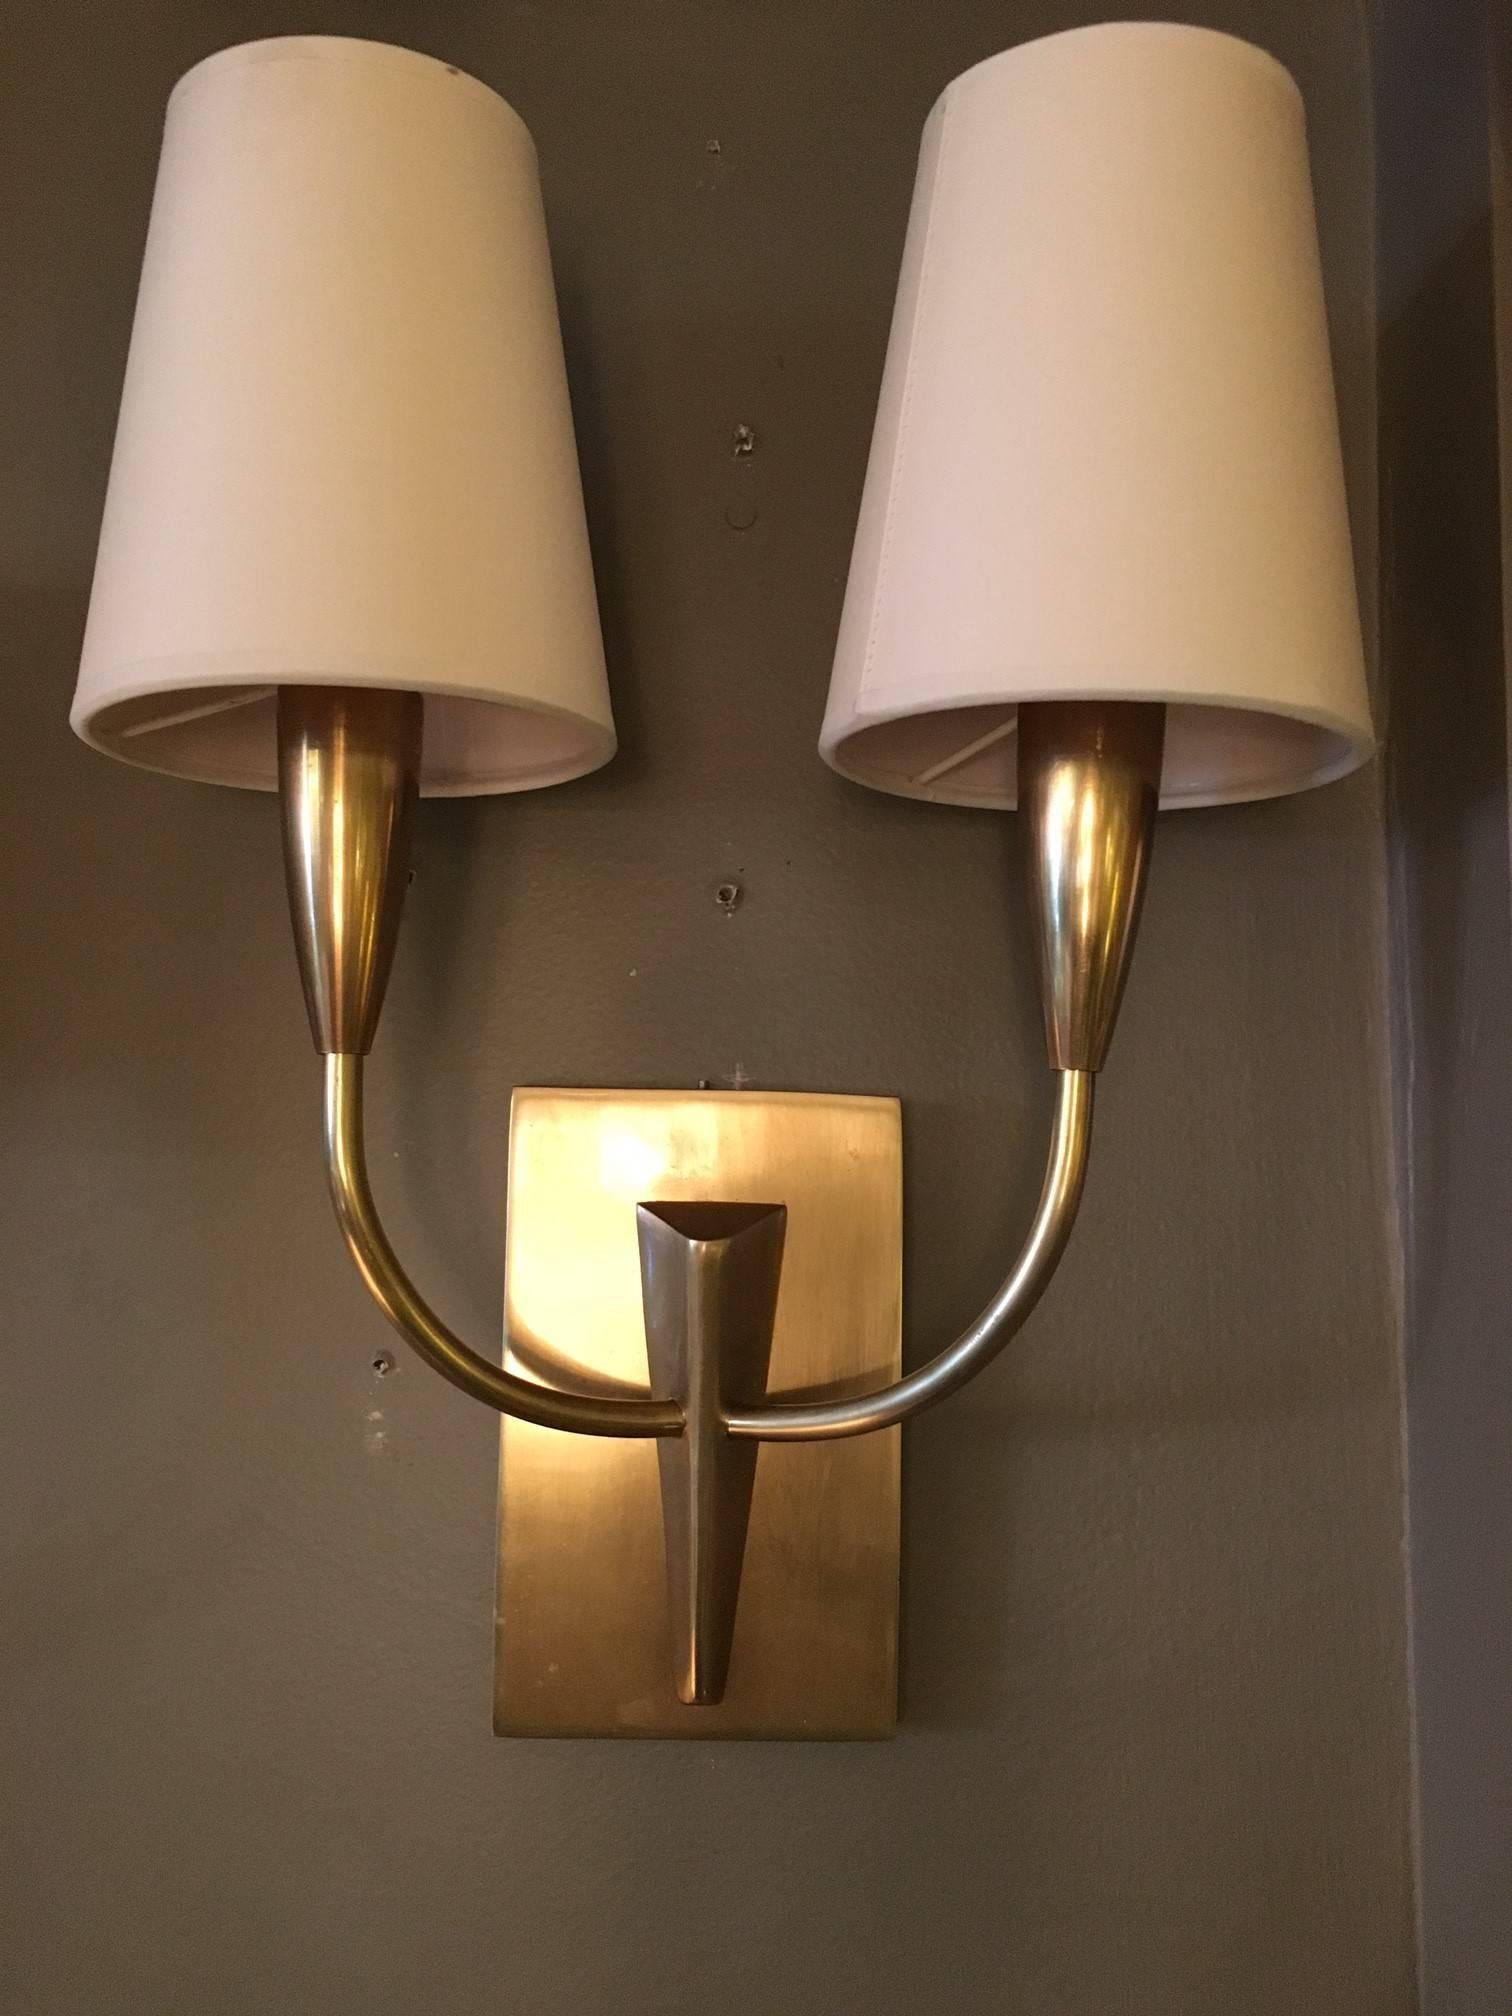 Pair of wall sconces with shades.